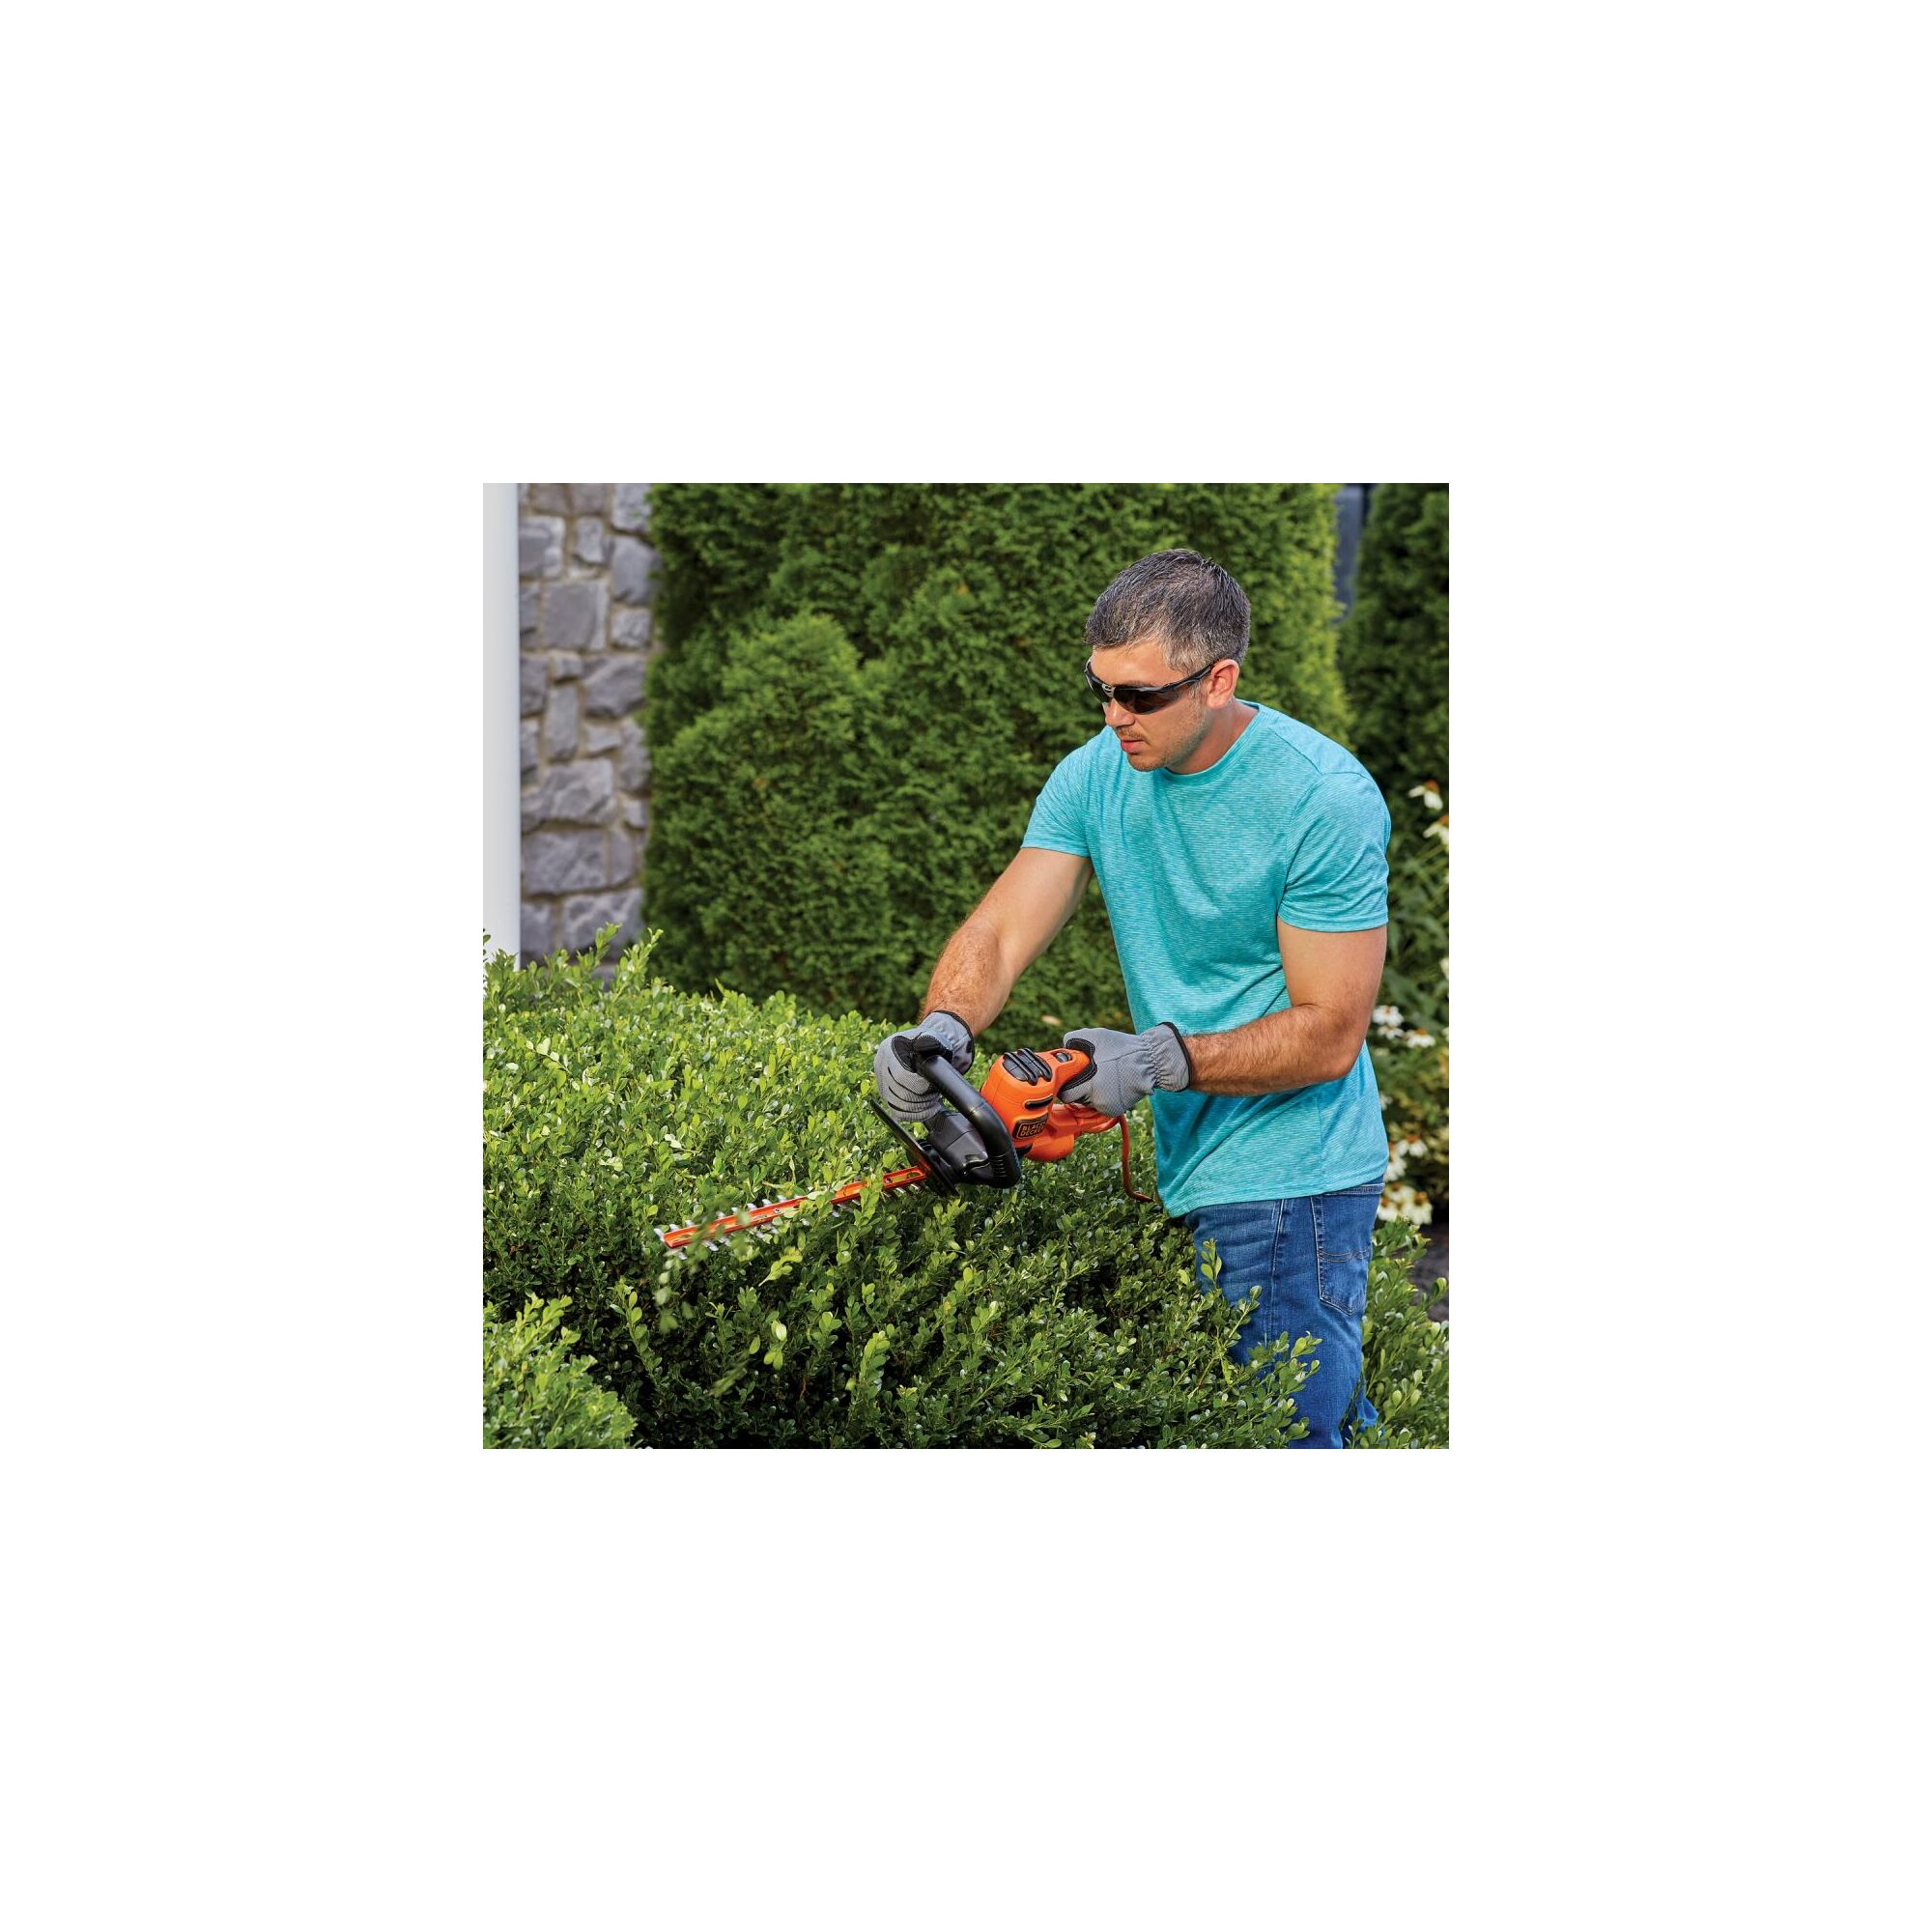 20 inch saw blade electric hedge trimmer being used by a person.